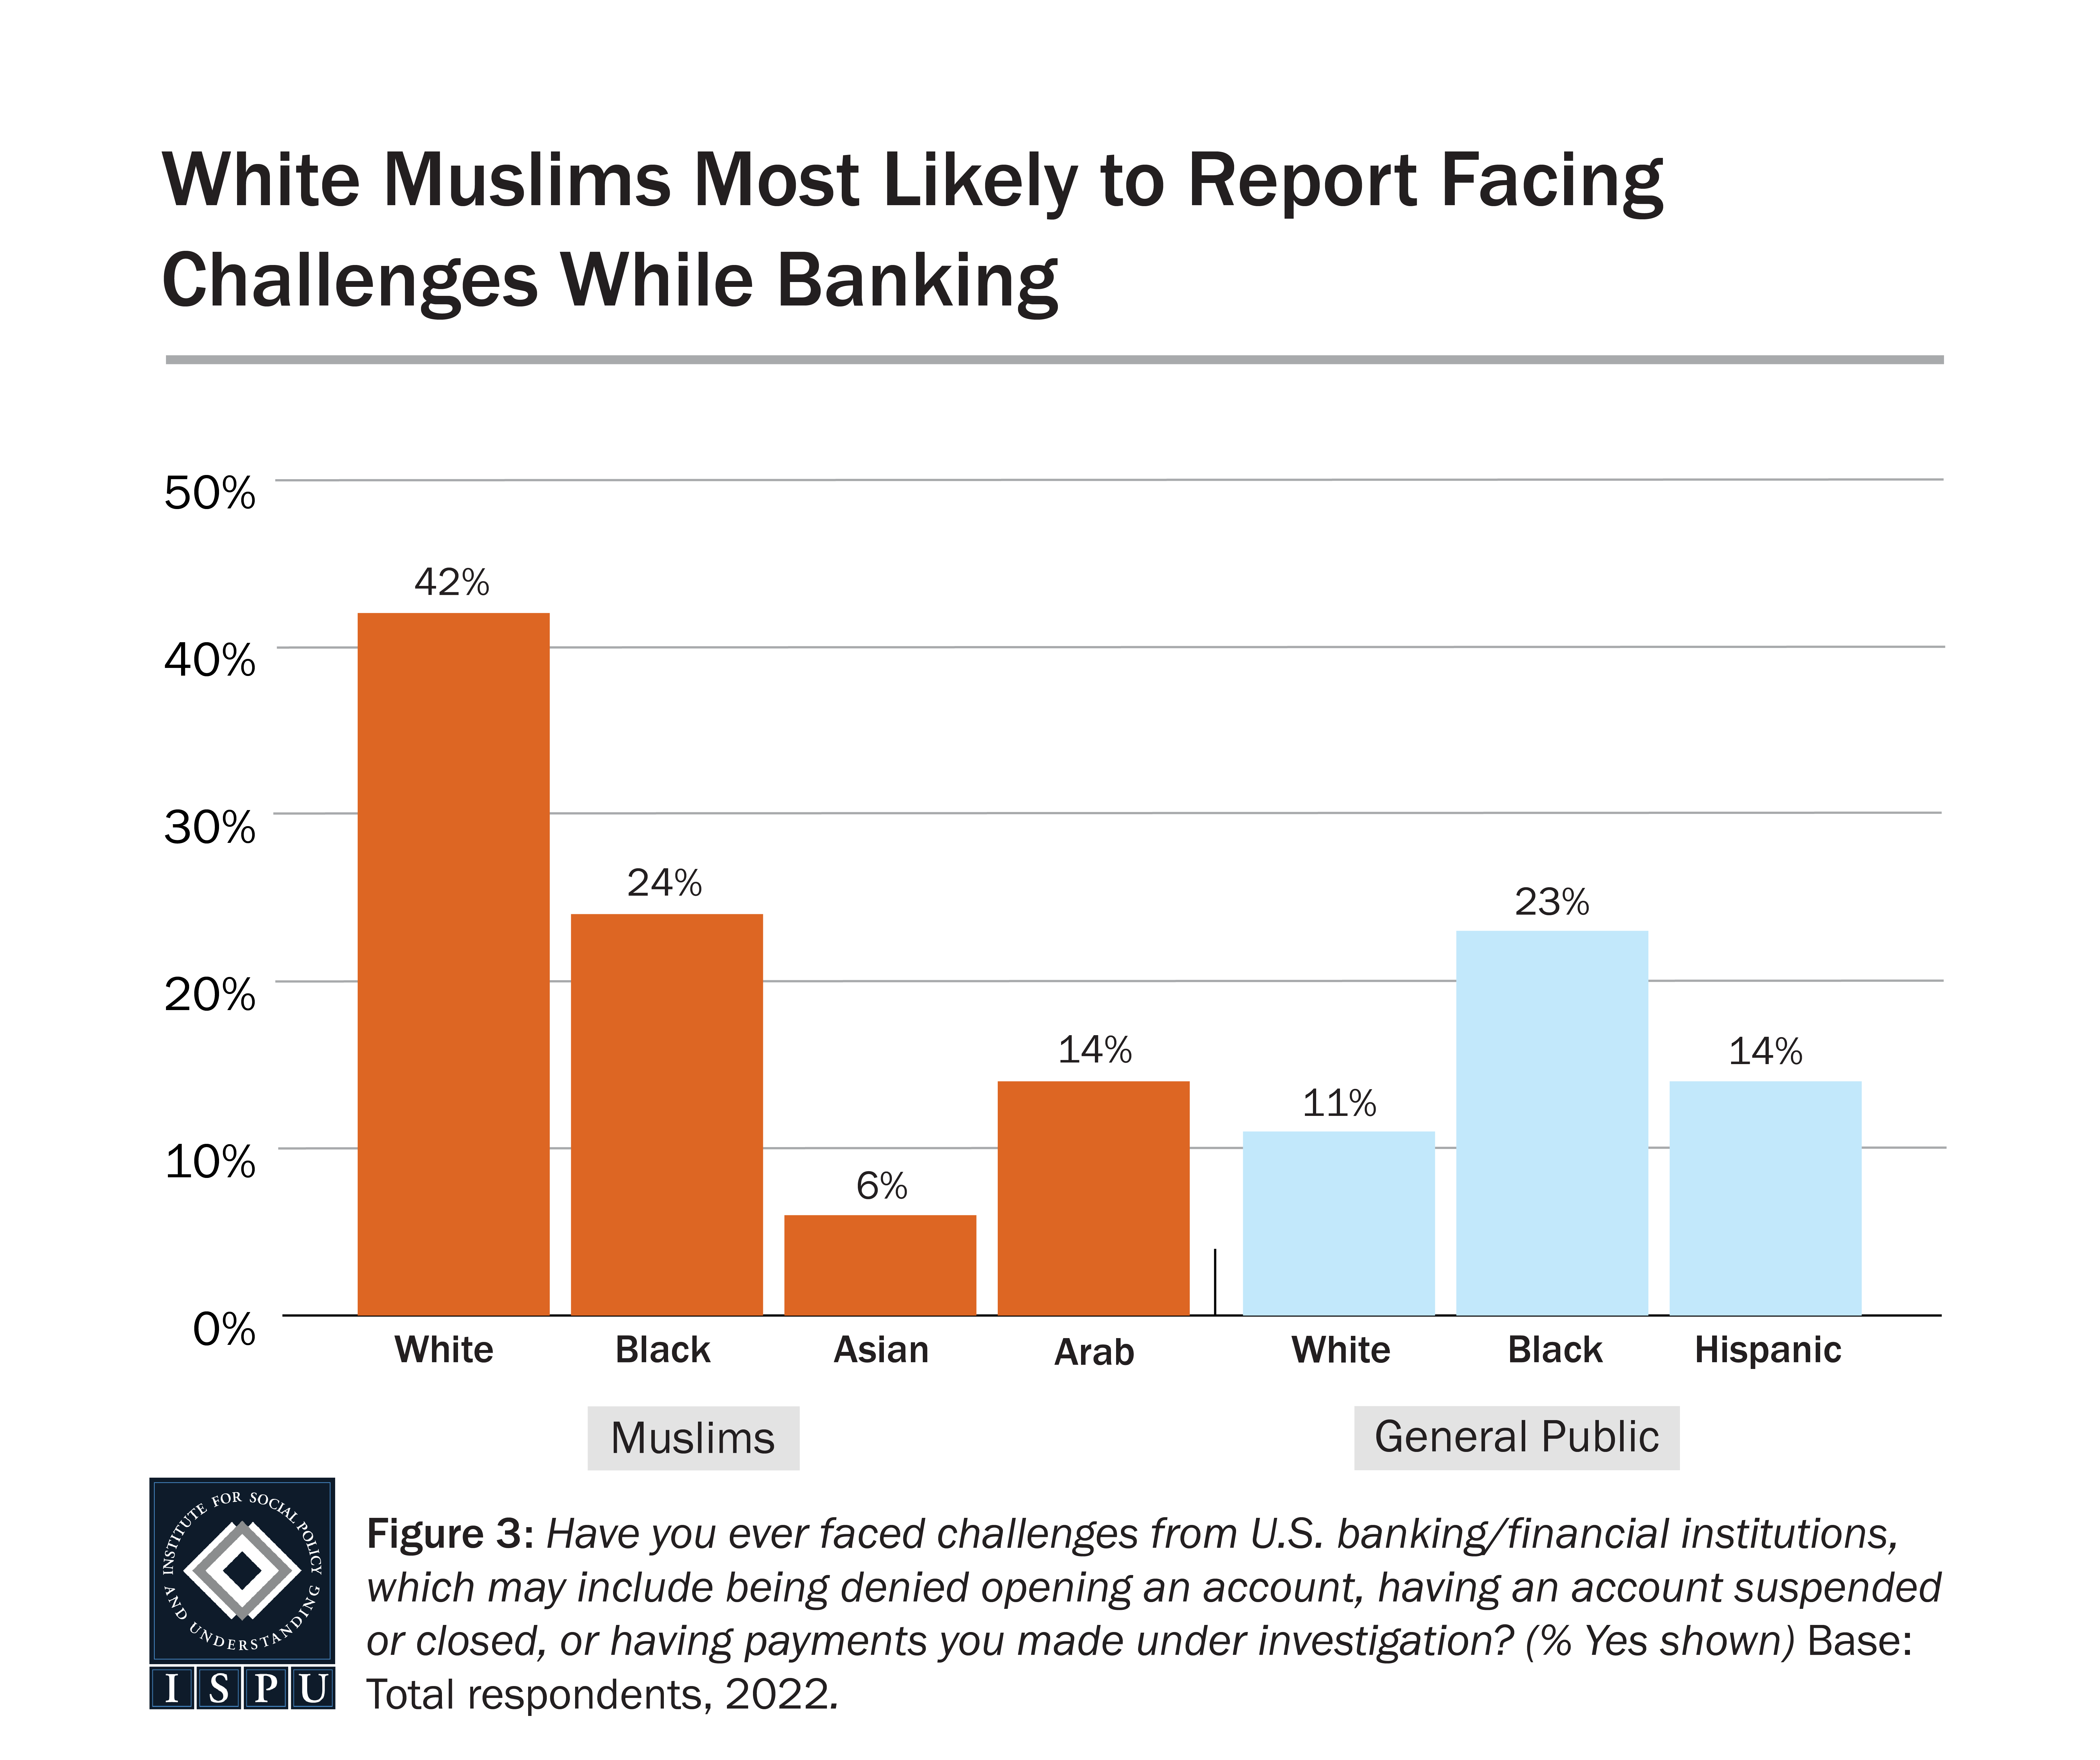 A bar graph showing the proportion of different racial/ethnic groups among Muslims and the general public who report facing challenges while banking.